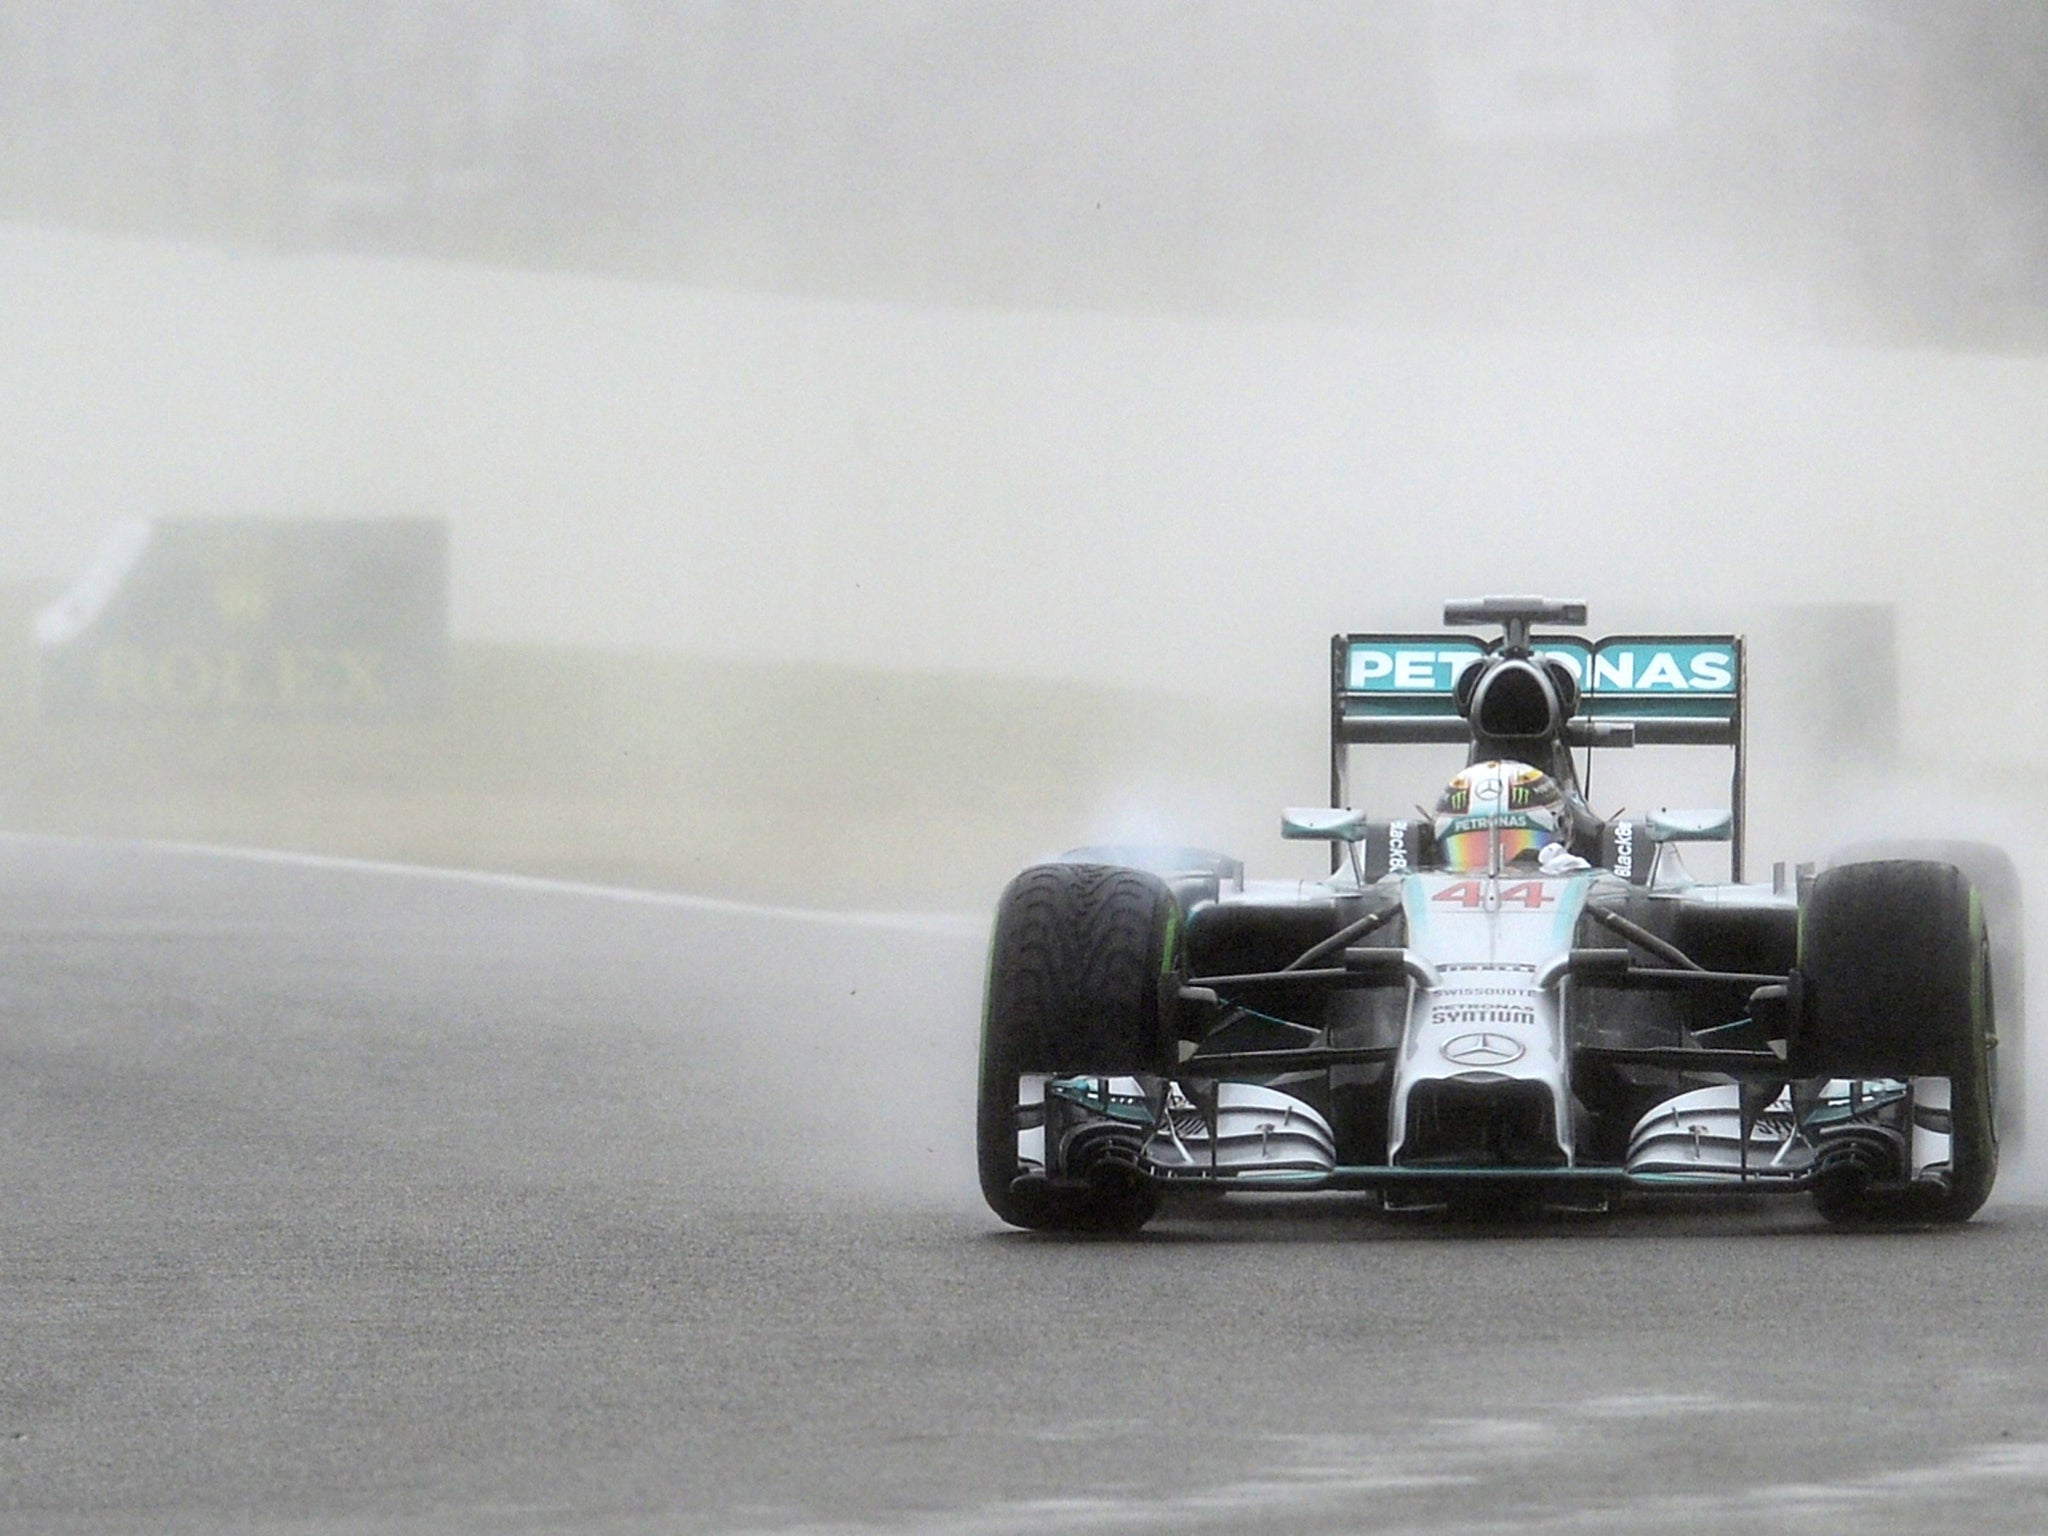 Mercedes-AMG's German driver Nico Rosberg on his way to poll position